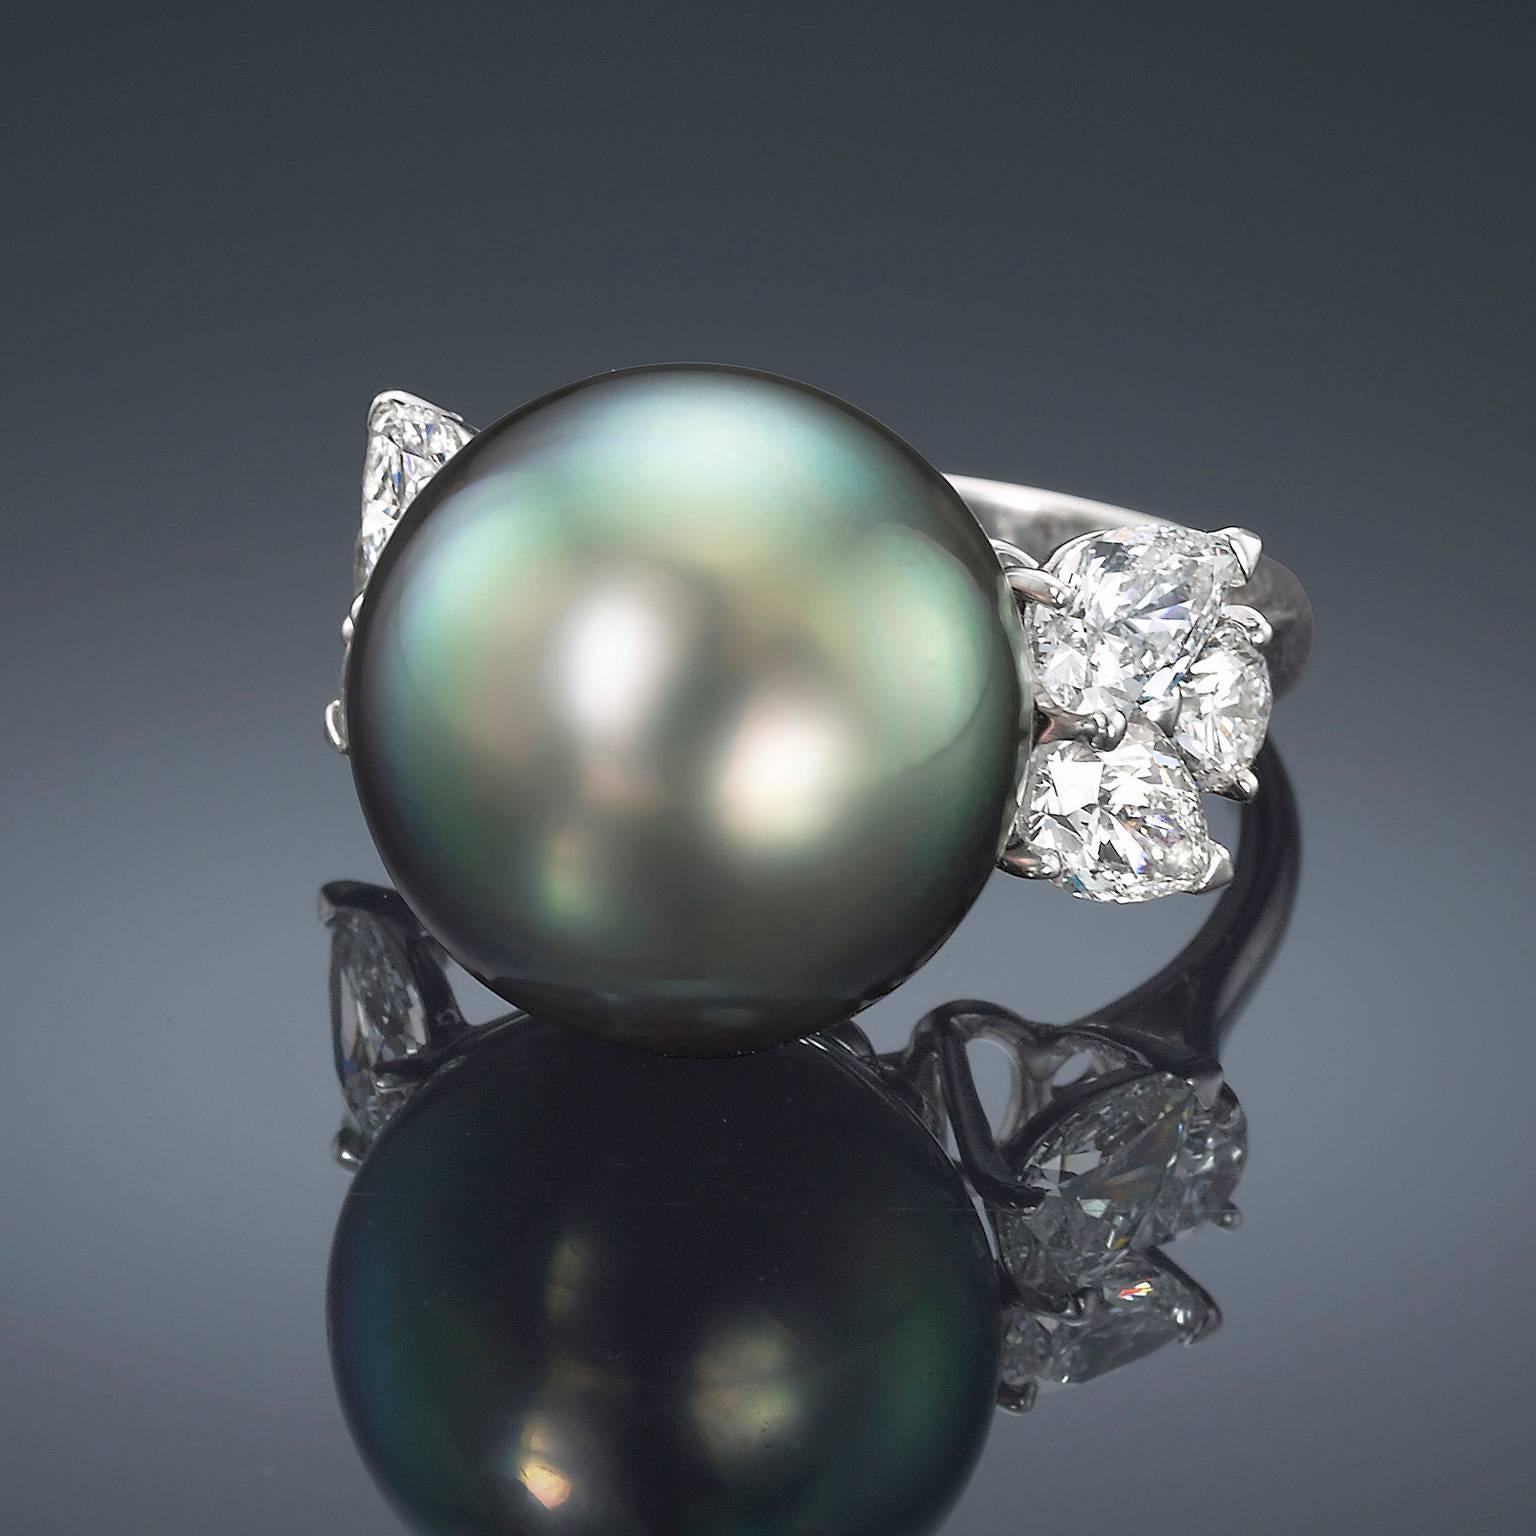 This stunning ring from Assael of New York is hand set in Platinum. Full Cut Pear and Round Diamonds highlight the luster and iridescent orient of this stunning Natural Color Tahitian Cultured Pearl. 
Size: 6
Gem quality Cultured Pearl, 14.8 -